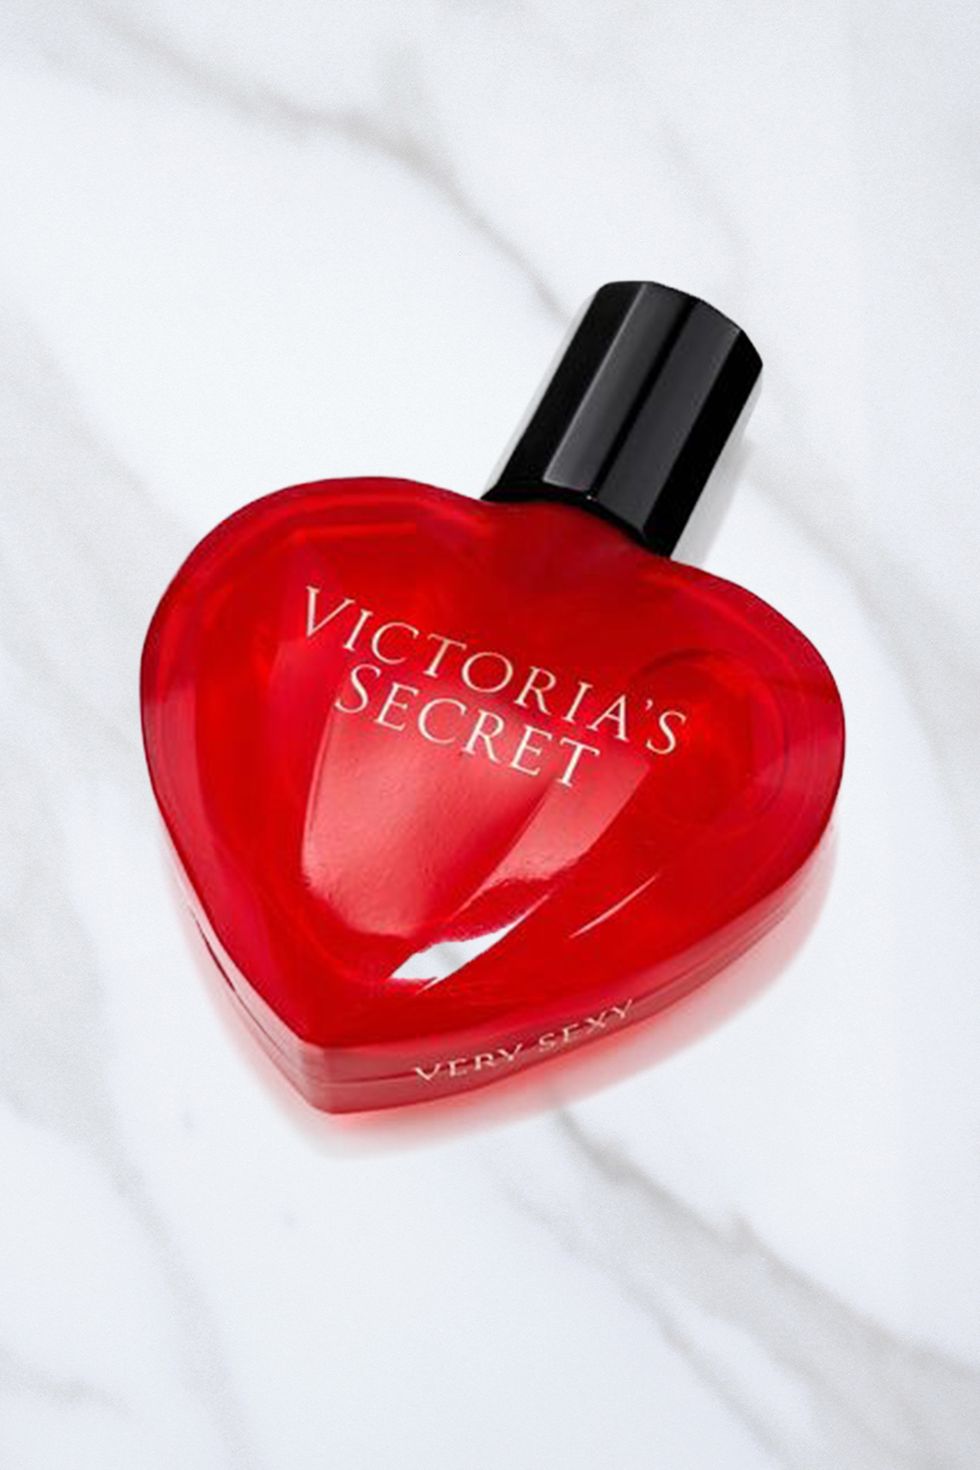 <p>Fact: Men are attracted the scent of vanilla. Spritz a sensual fragrance like <a href="https://www.victoriassecret.com/beauty/fragrance/very-sexy-heart-eau-de-parfum?ProductID=276911&CatalogueType=OLS" target="_blank">Victoria's Secret Very Sexy Heart Eau de Parfum</a>, $30, onto your neck and hair. It's a sweet blend of vanilla orchid, clementine, and blackberry, aka total dude bait. </p>